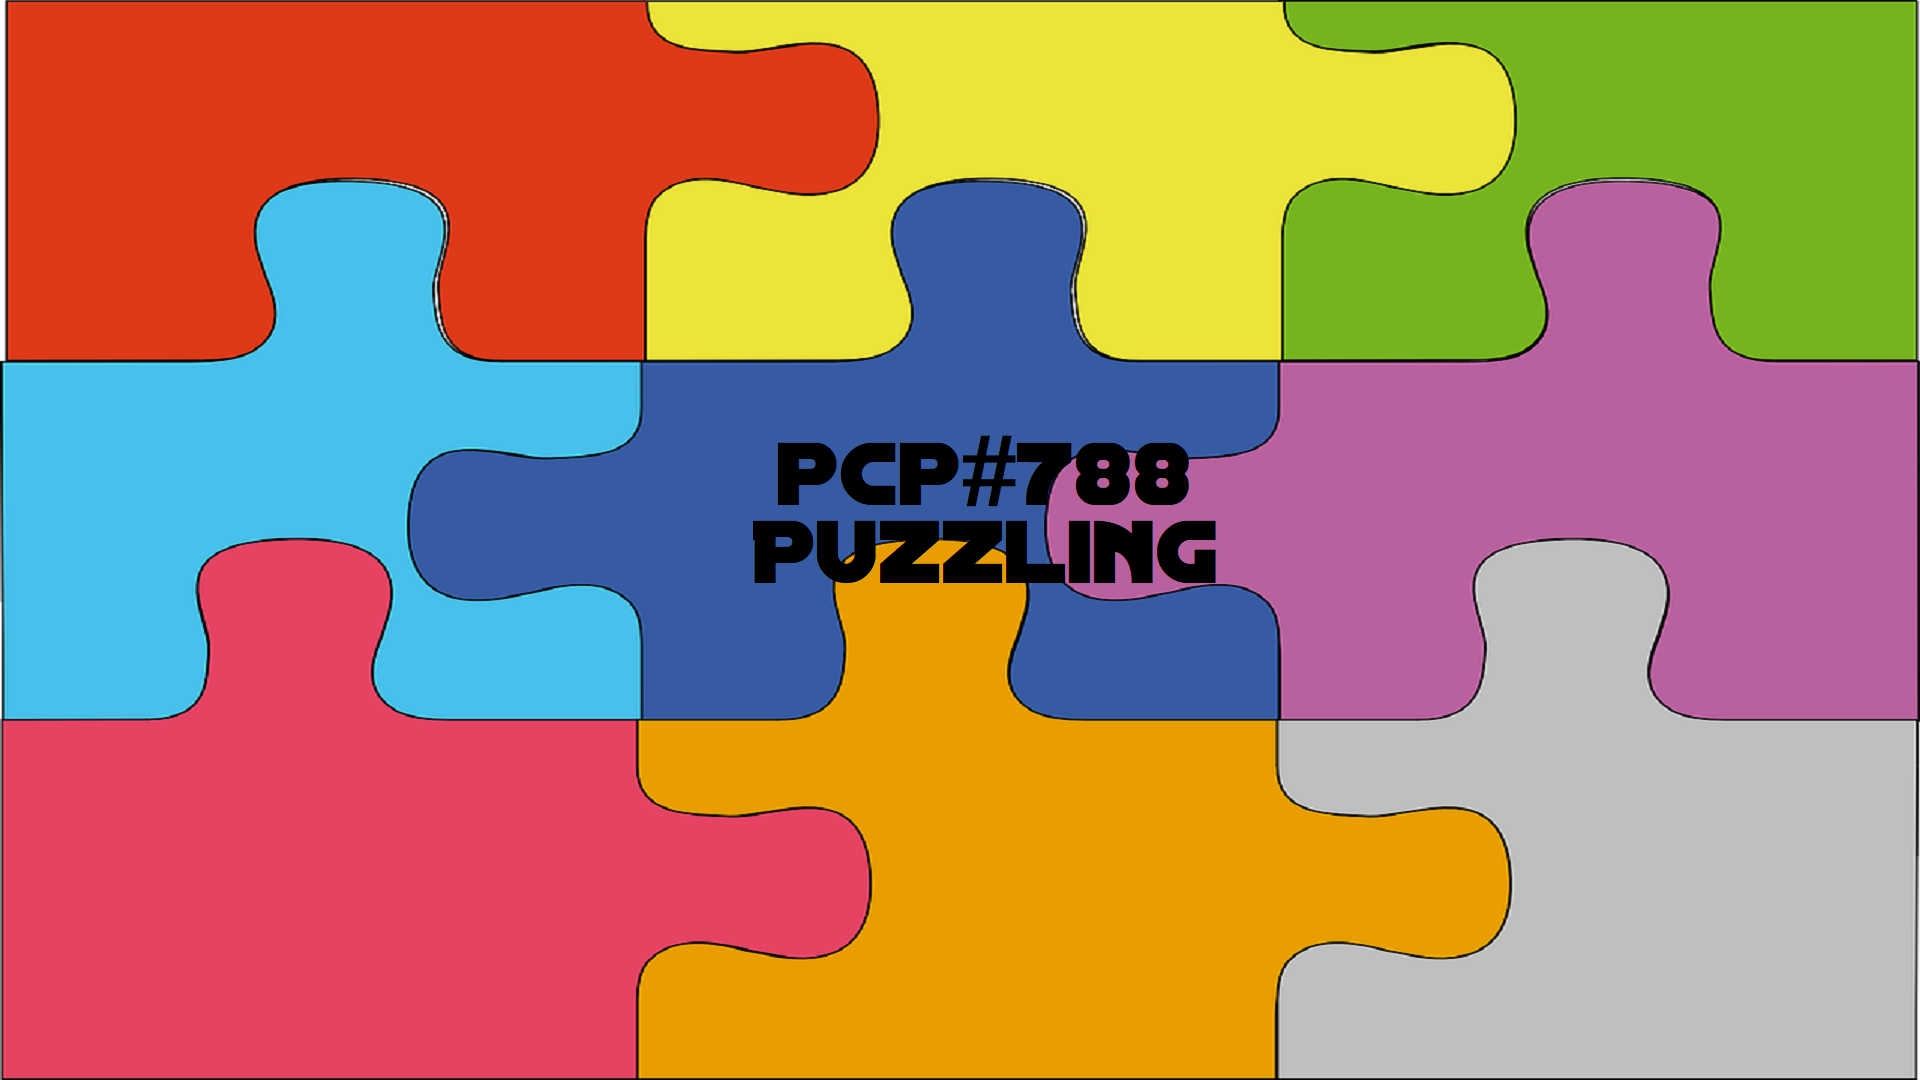 PCP#788... Puzzling...